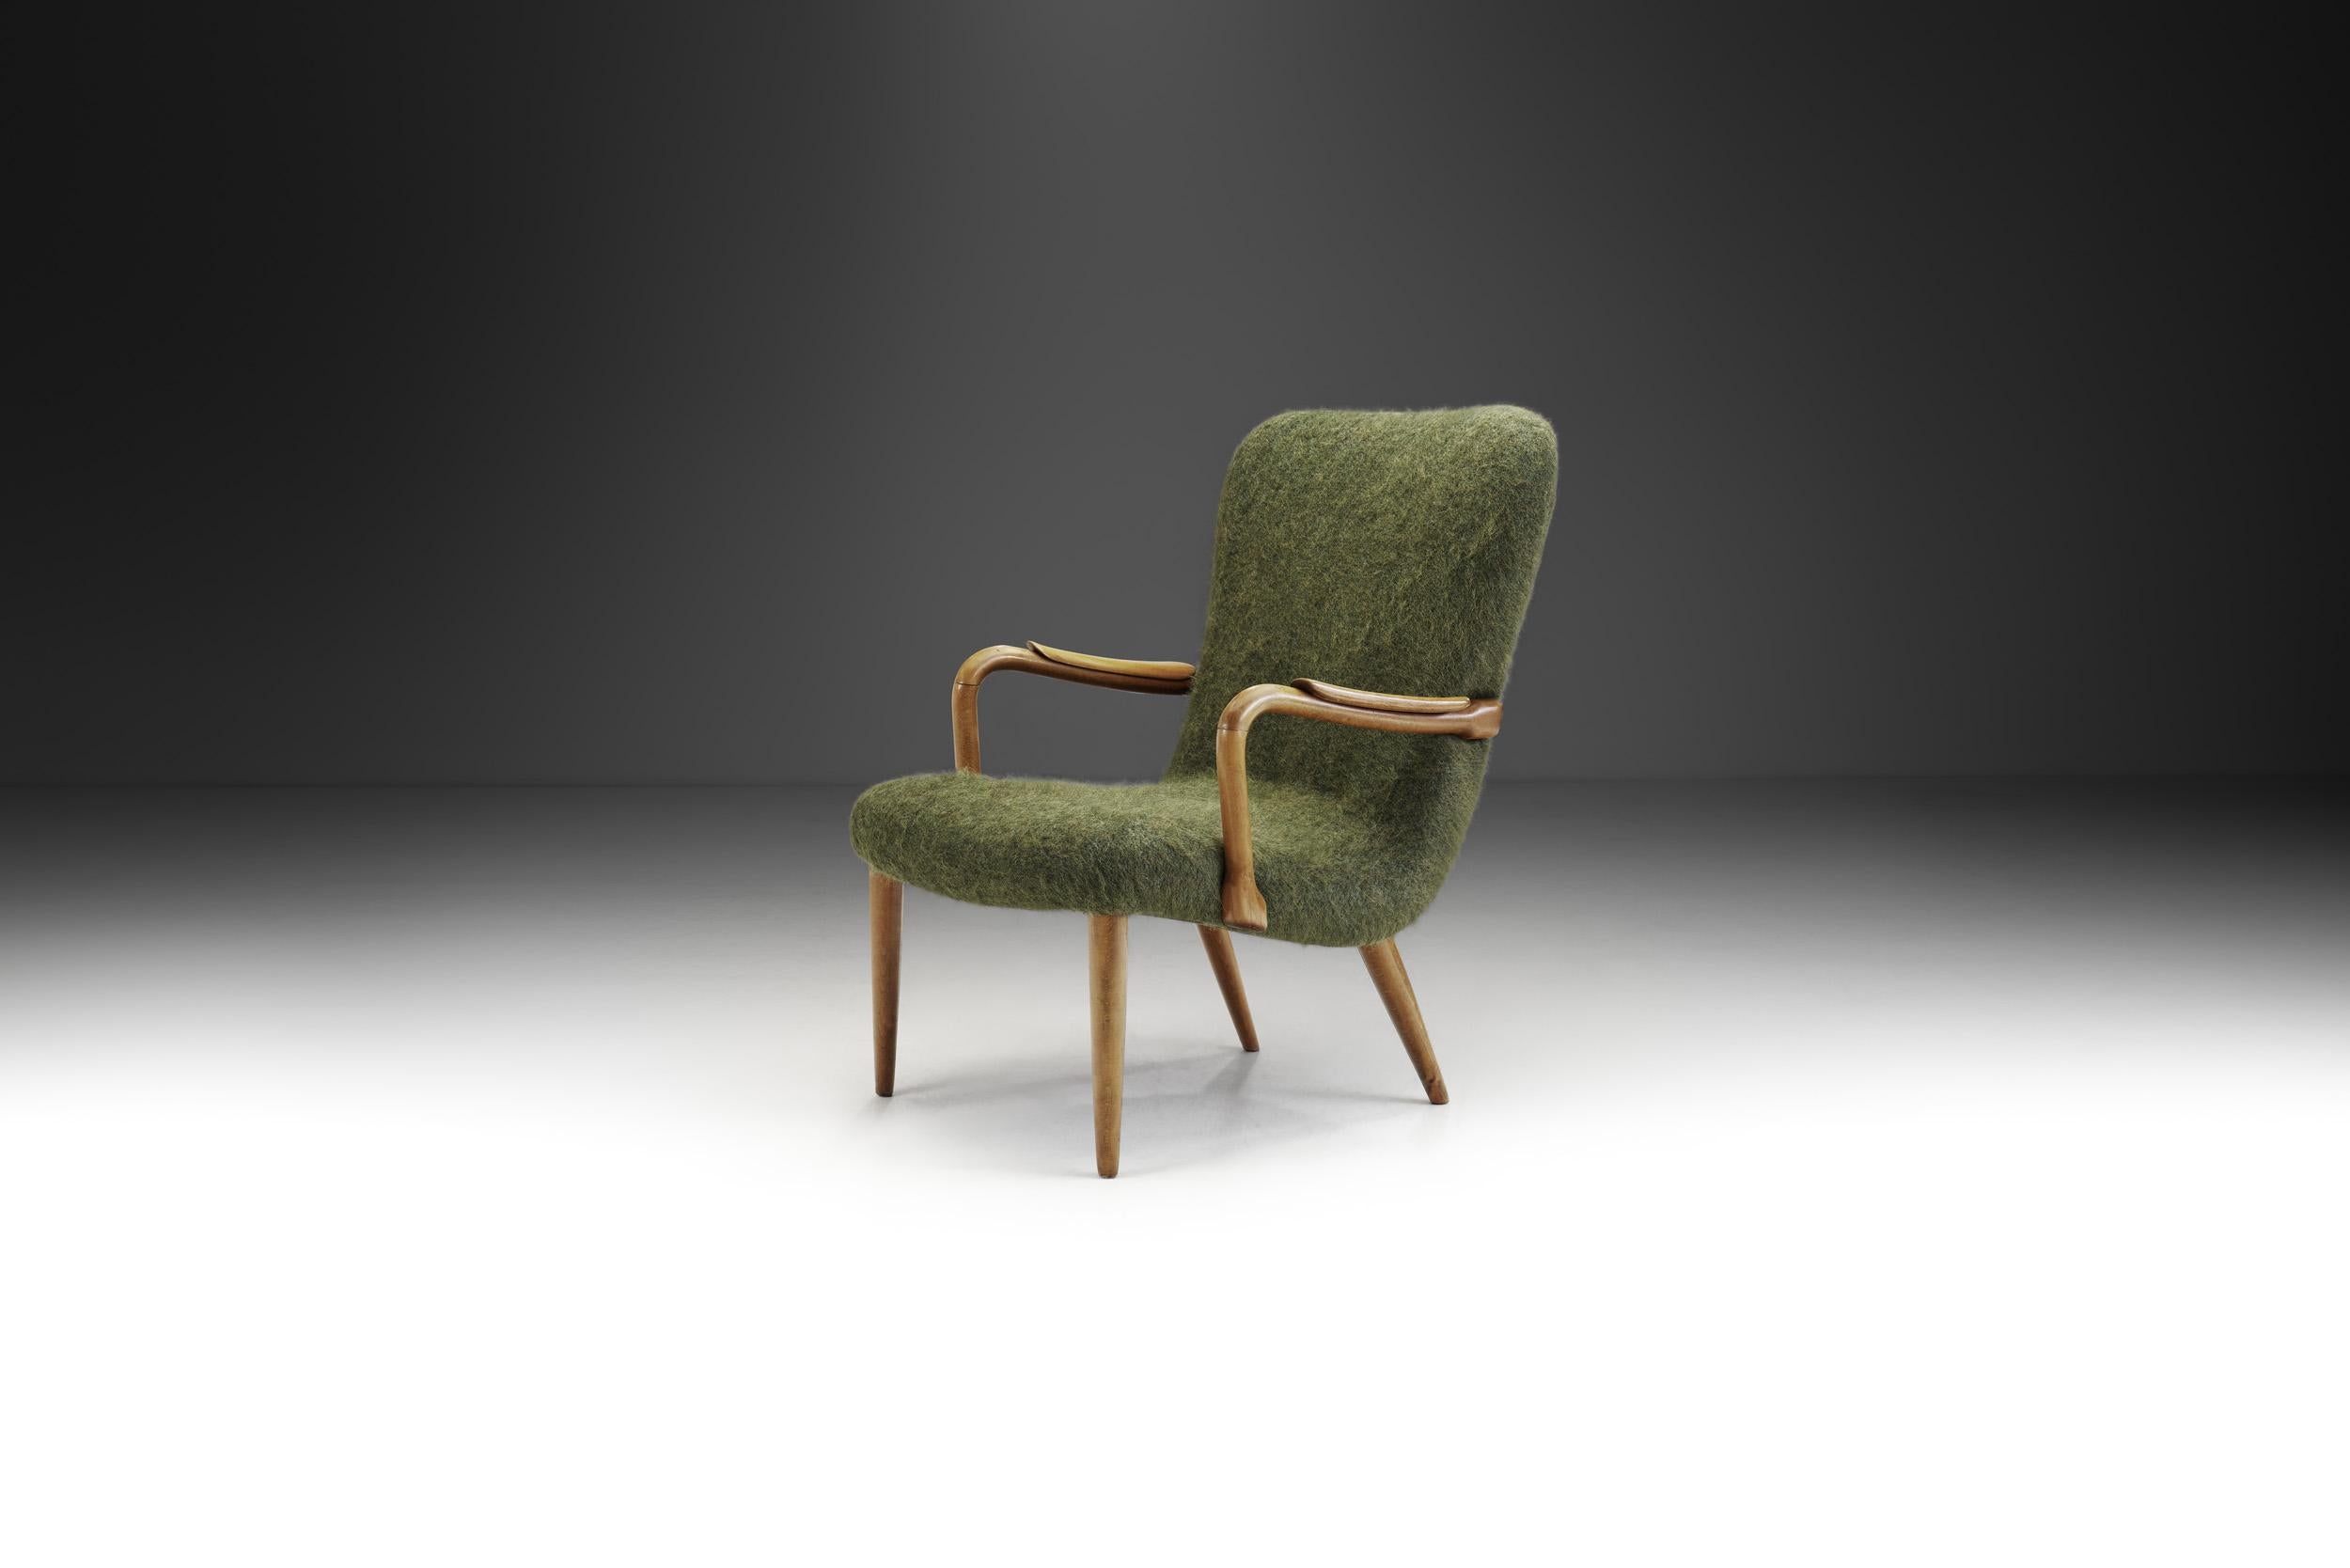 Danish design is a remarkable combination of concern for comfort and materiality melded with a desire for Shaker-like clarity. Most notably, the vintage pieces of the 1950s, like this stylish easy chair, are an exciting collision of sensuality,